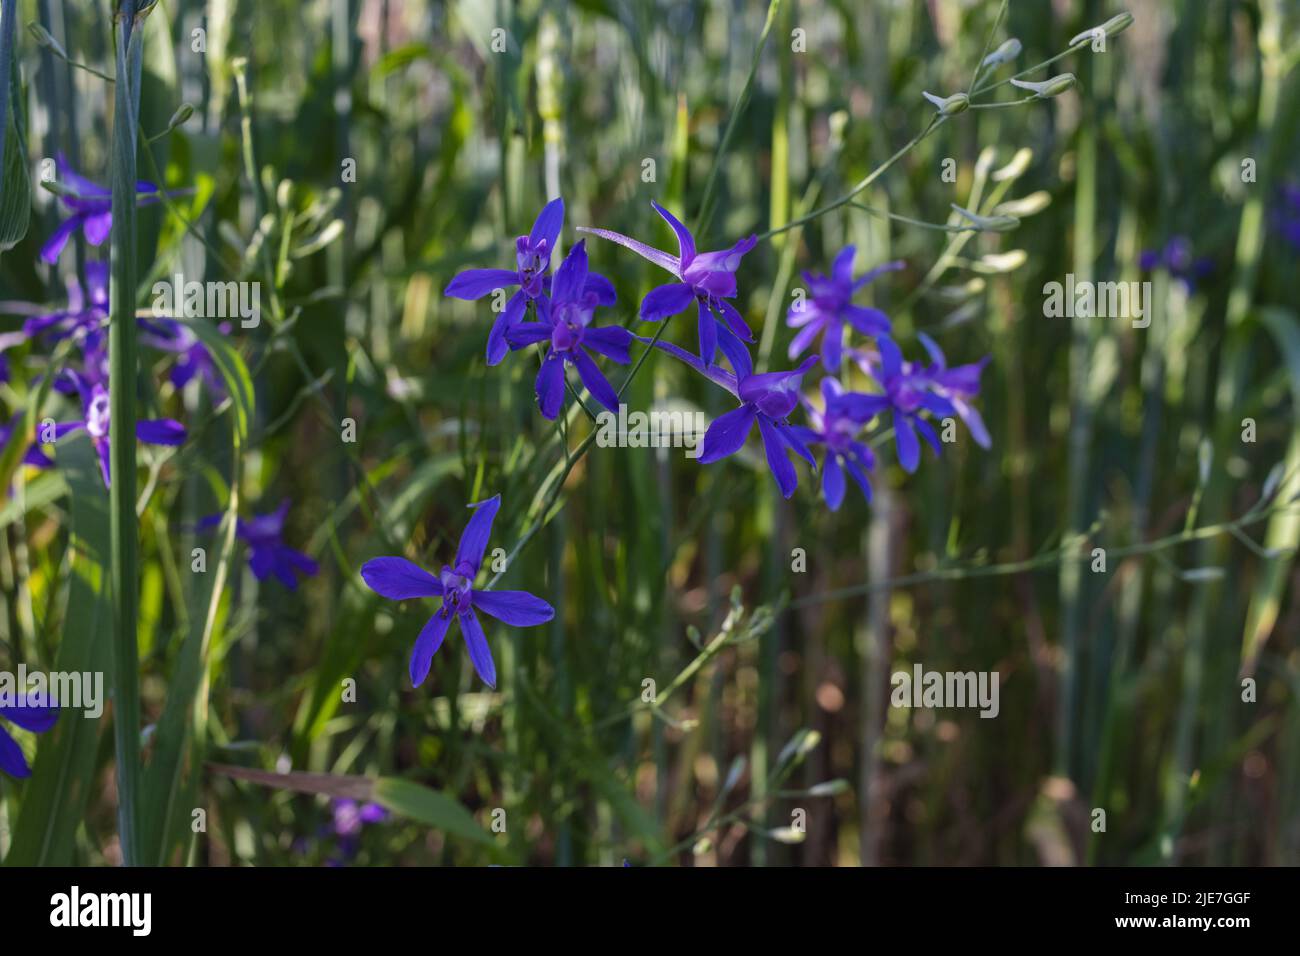 Forking larkspur, Consolida regalis or Wild Delphinium blue flowers, shallow depth of field Stock Photo